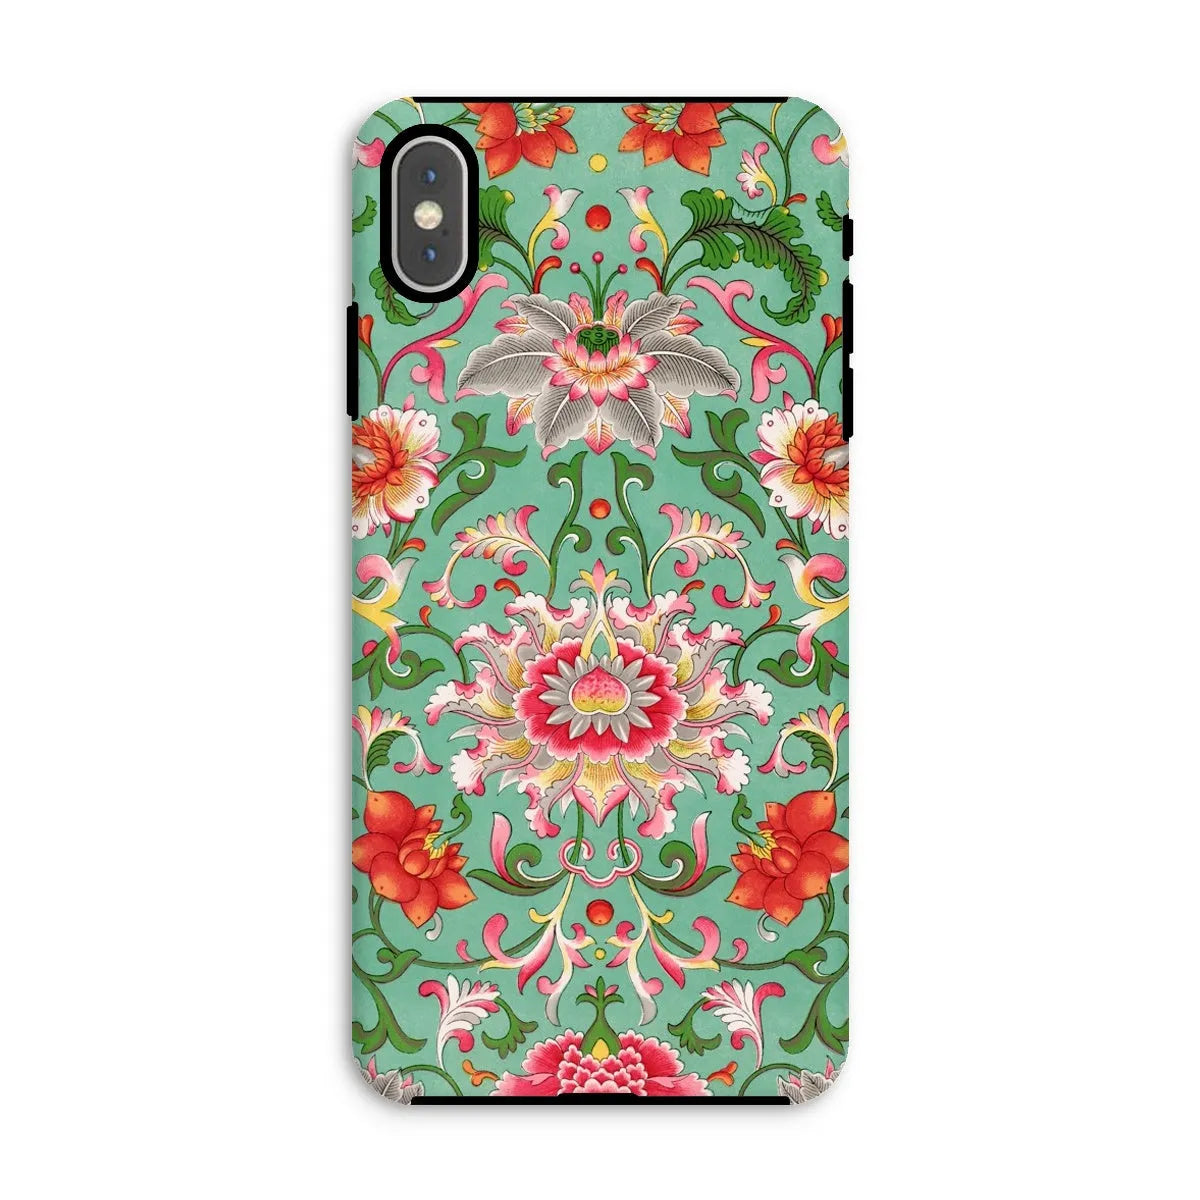 Chinese Floral Aesthetic Art Phone Case - Owen Jones - Iphone Xs Max / Matte - Mobile Phone Cases - Aesthetic Art